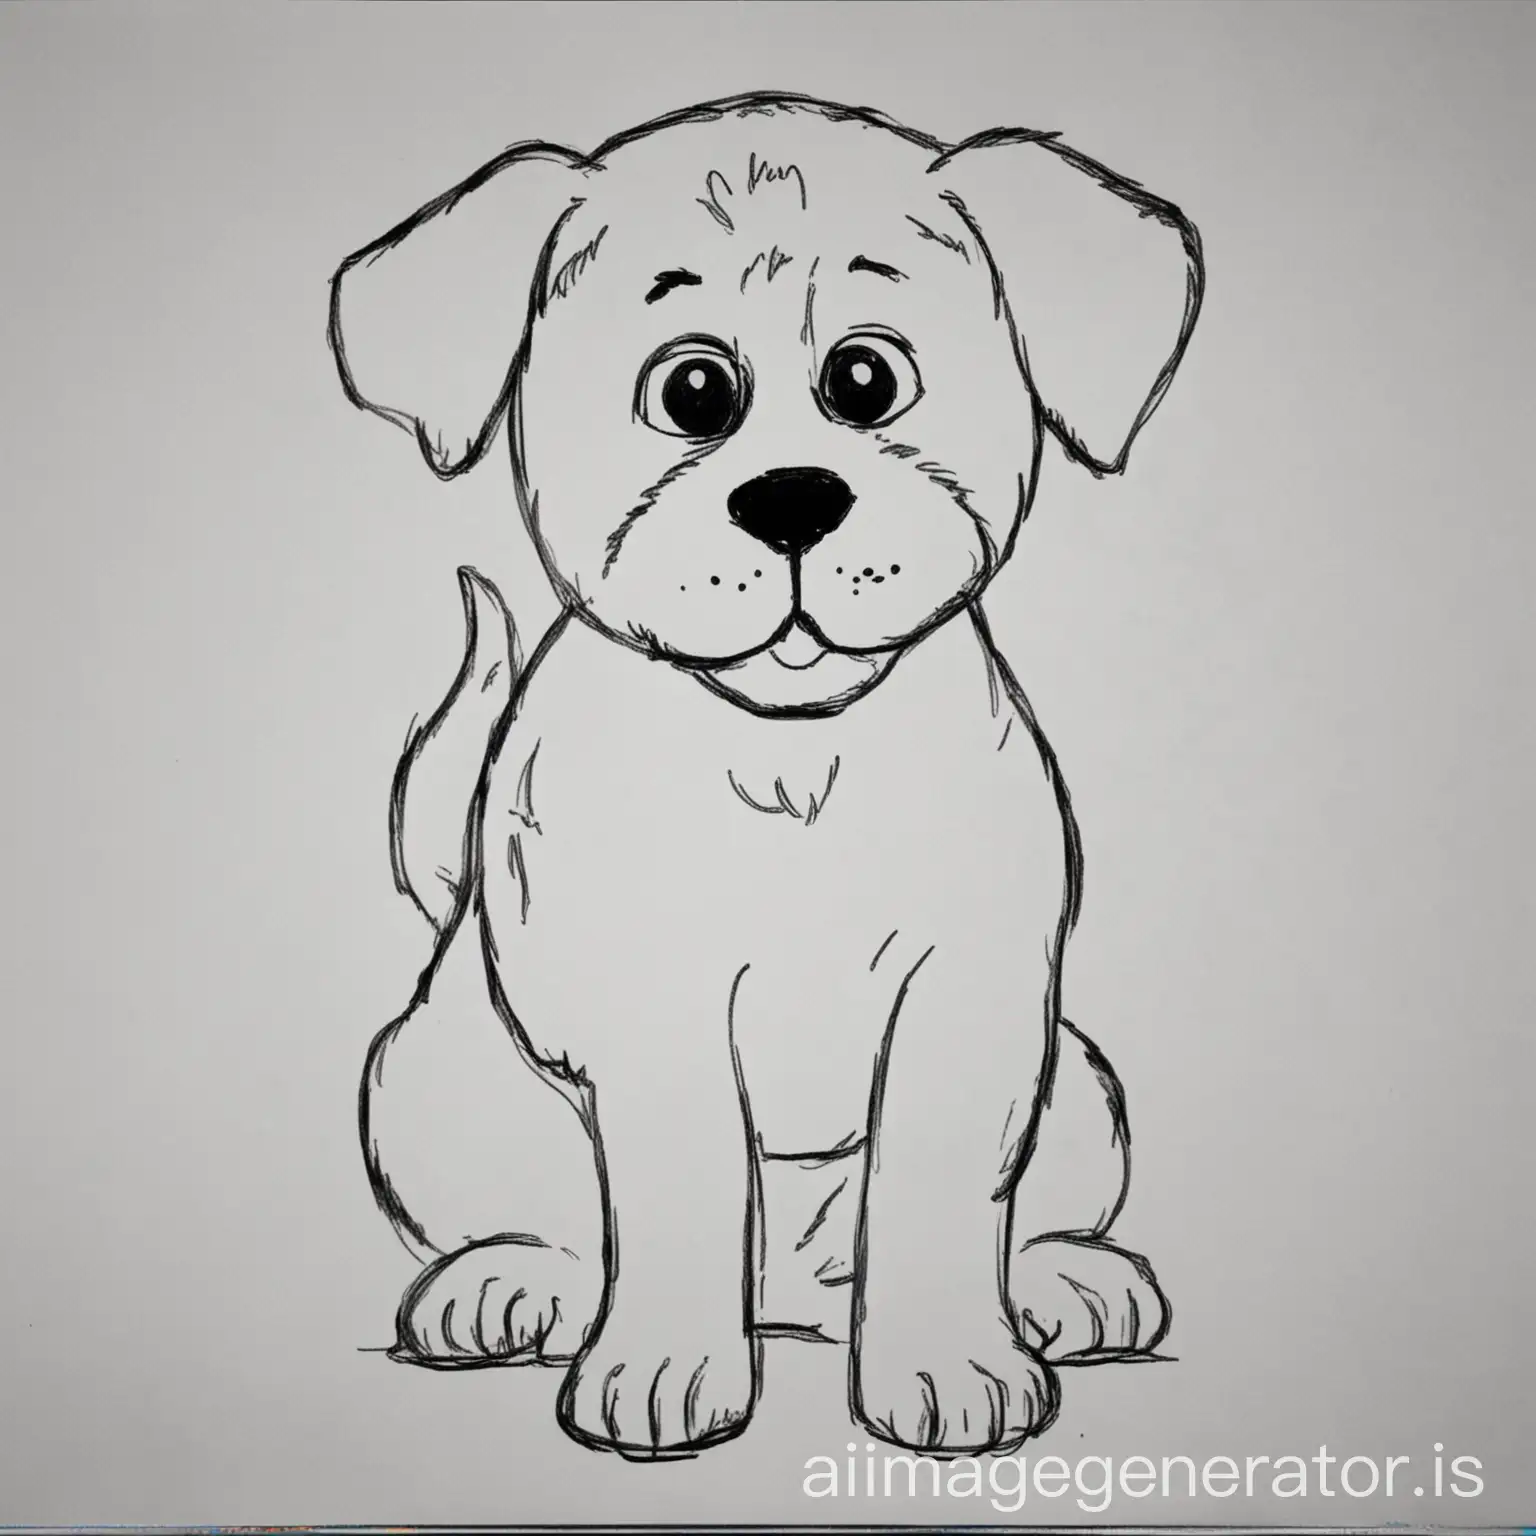 Create dog images for children from 3 years old to color